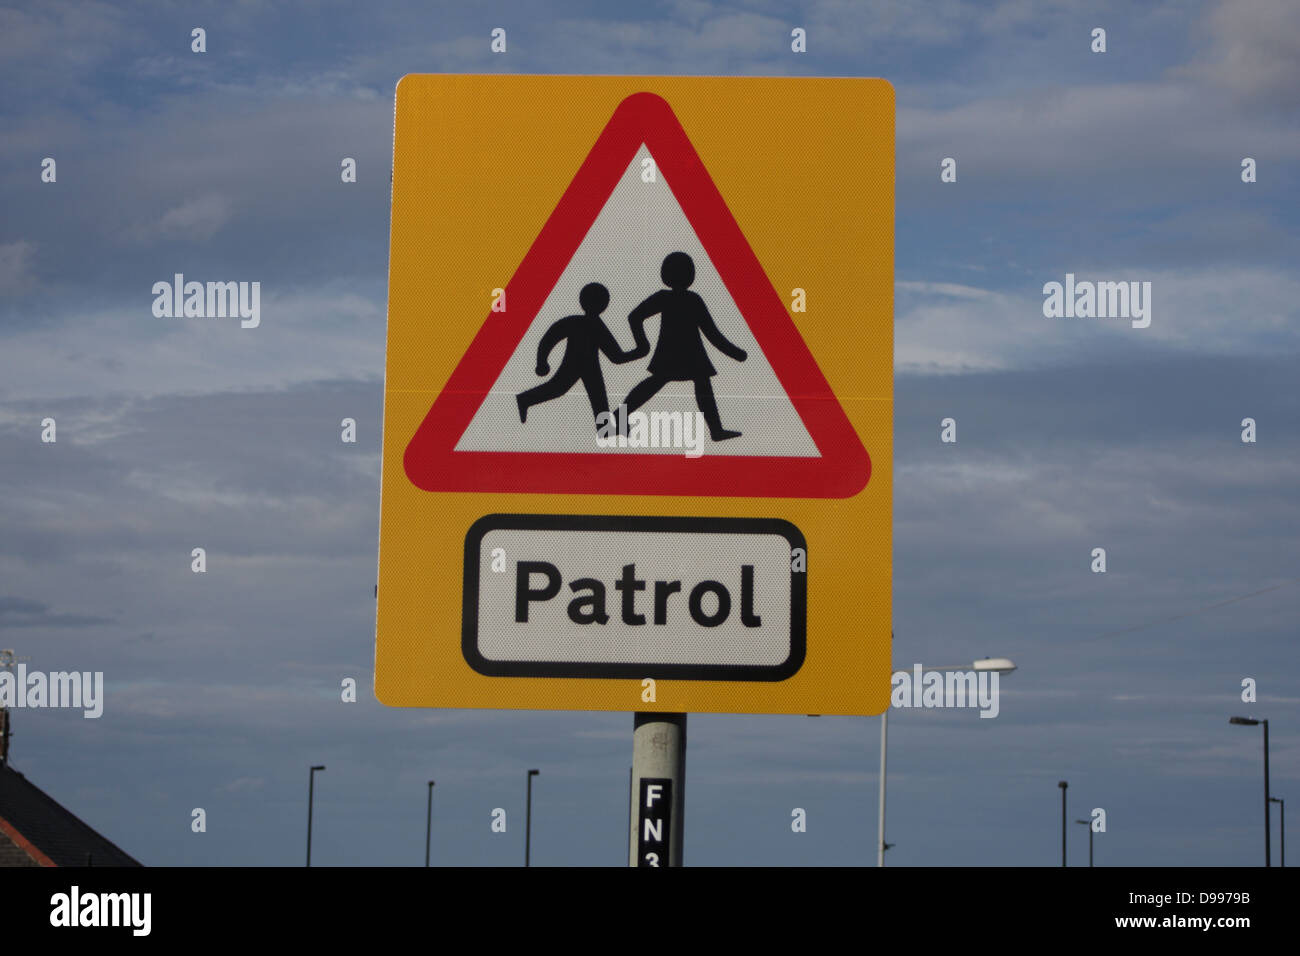 School Patrol - Road traffic sign, warns motorists about children coming and going to and from school. Sign central, landscape Stock Photo